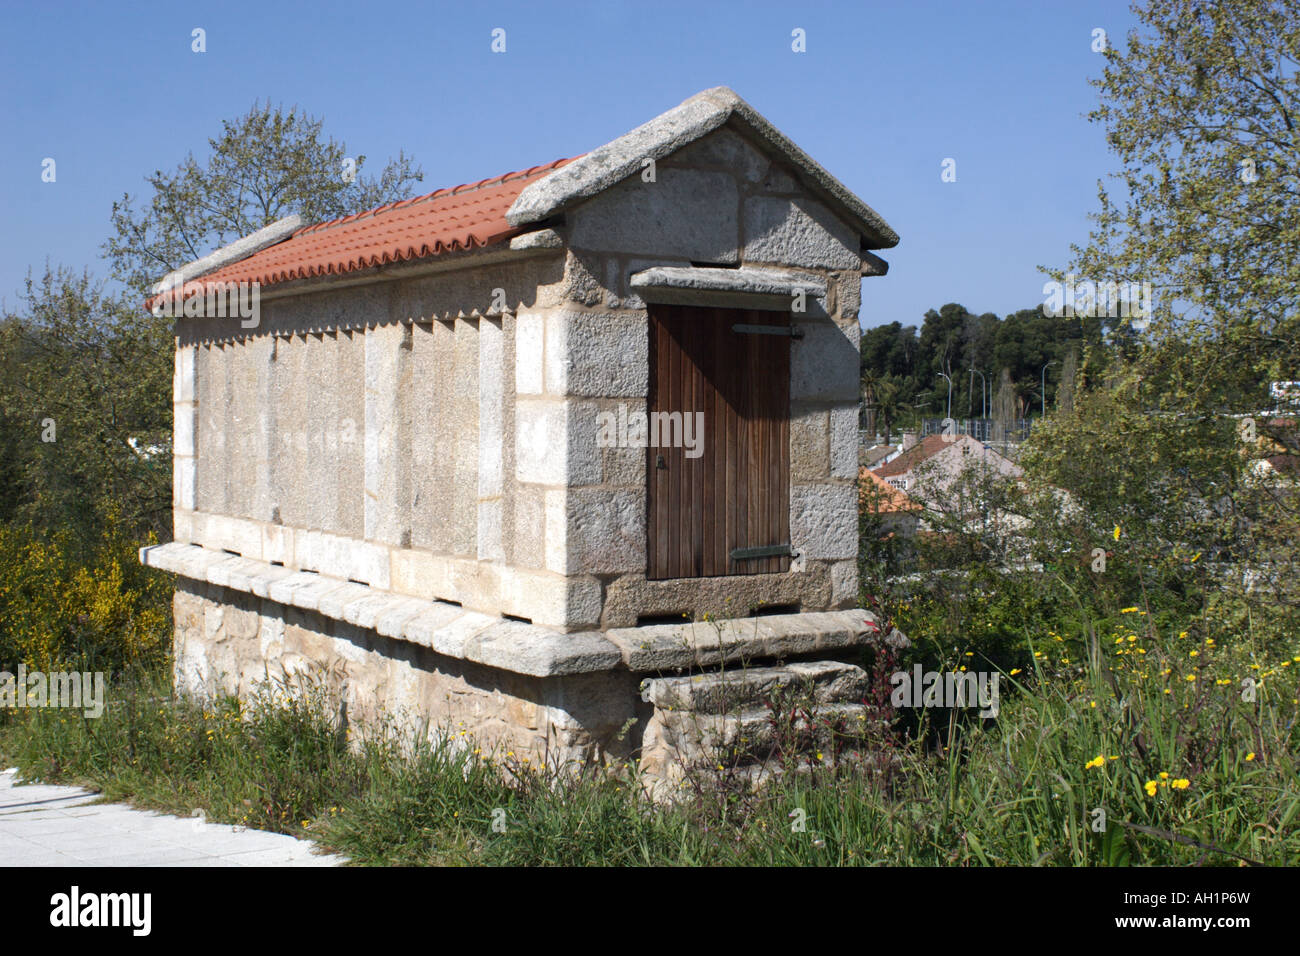 Horreo, a traditional Galician grain store, in Spain Stock Photo